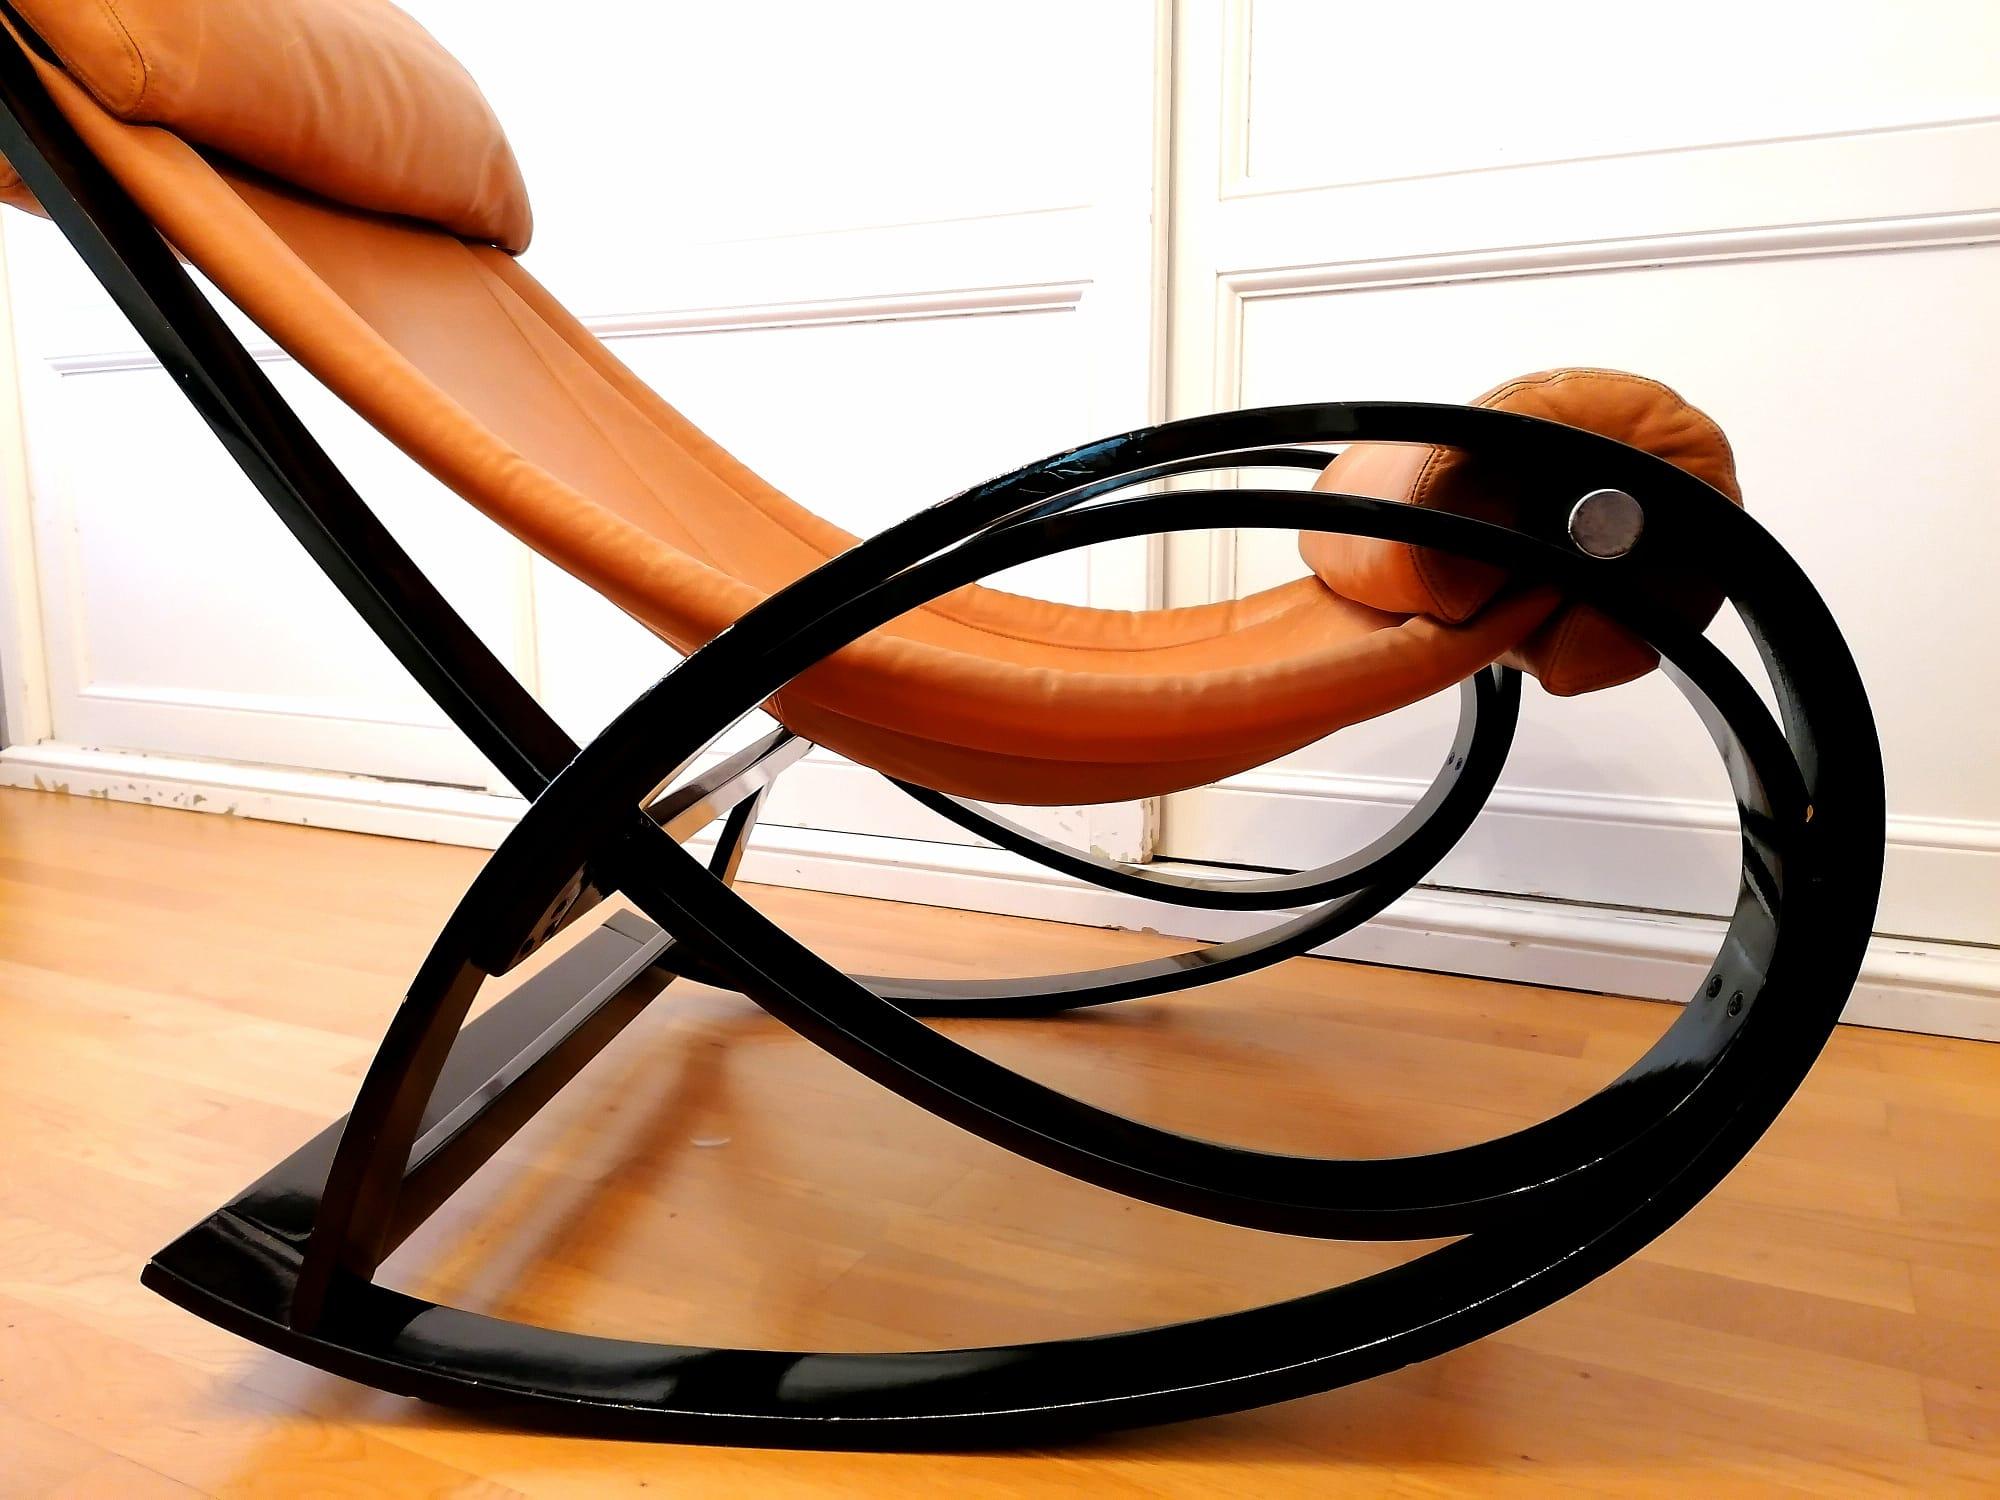 Sgarsul rocking chair by Gae Aulenti from Poltronova, Italy, 1960s.
Rocking armchair in curved and lacquered black rosewood, with headrest and seat padded and covered with cognac leather, Sgarsul is confortevol and iconic piece that represent the